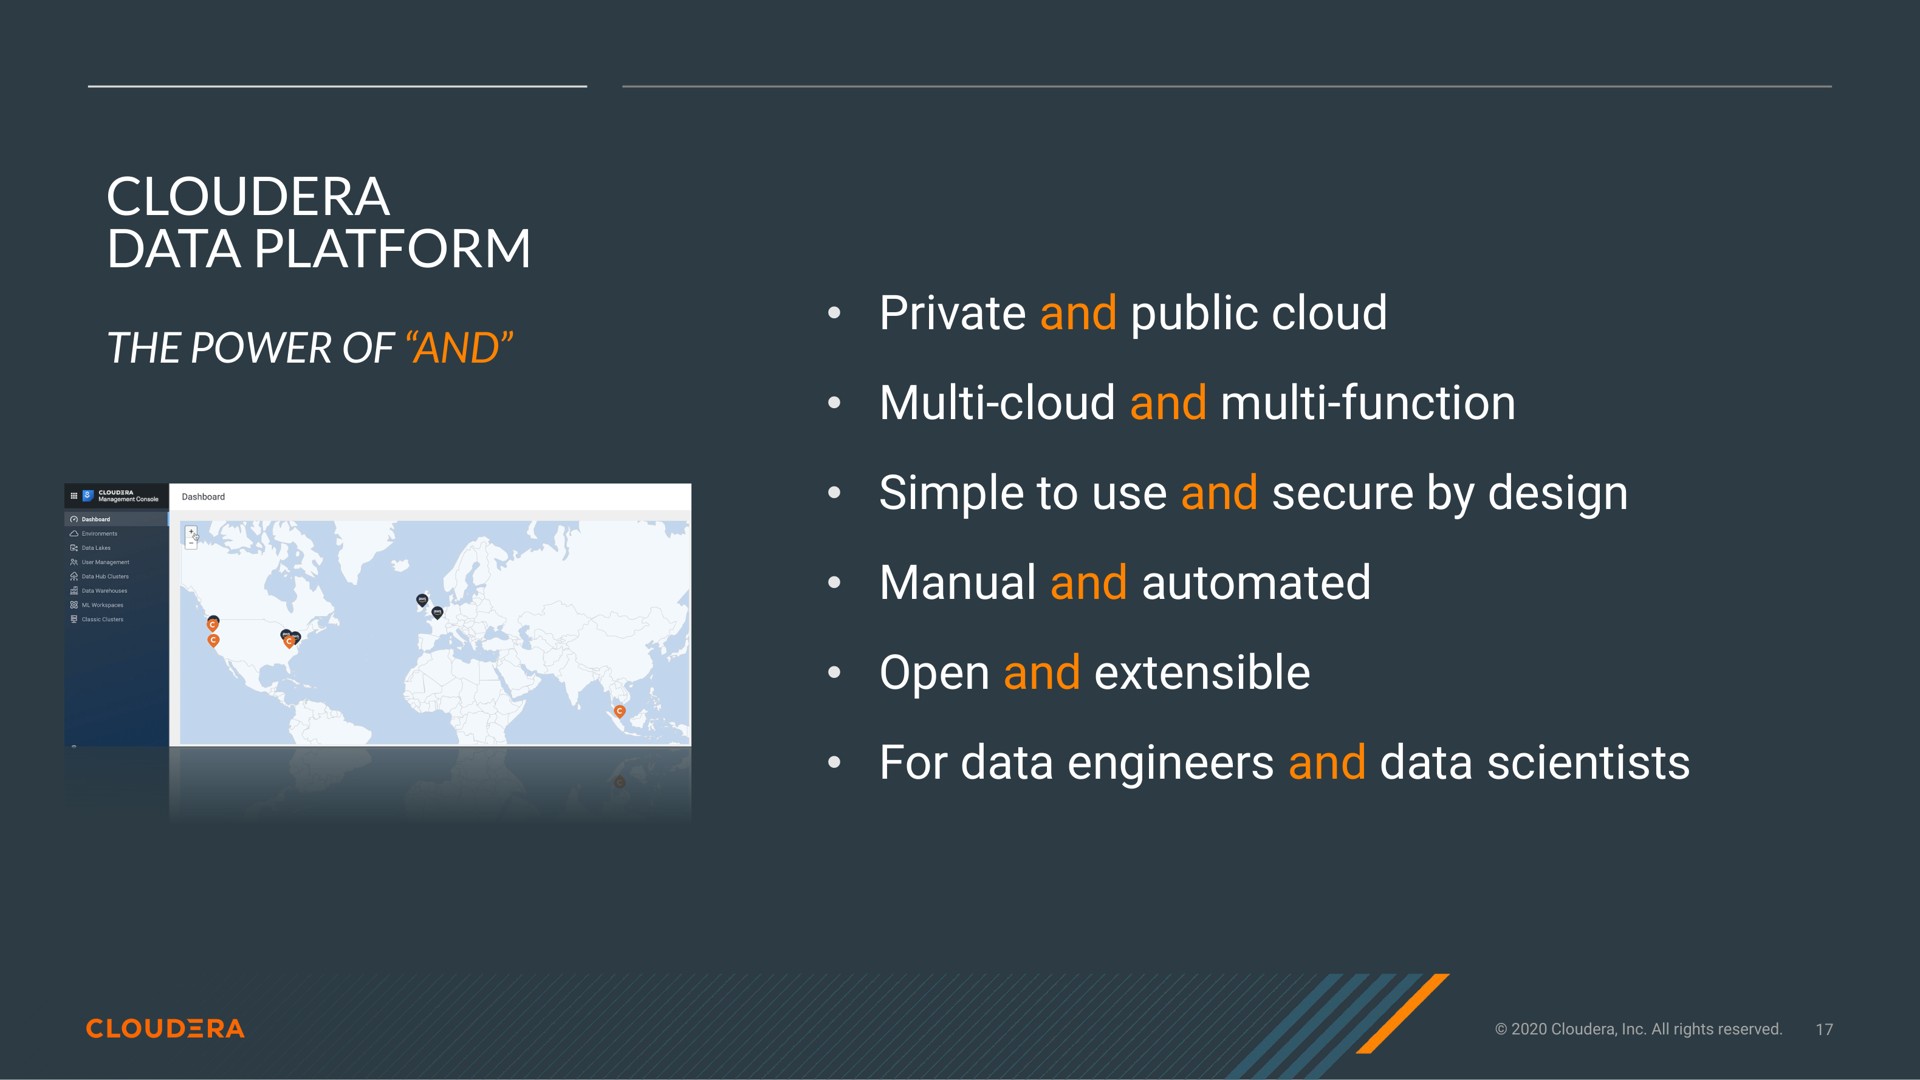 data platform private and public cloud cloud and function simple to use and secure by design manual and open and extensible for data engineers and data scientists | Cloudera